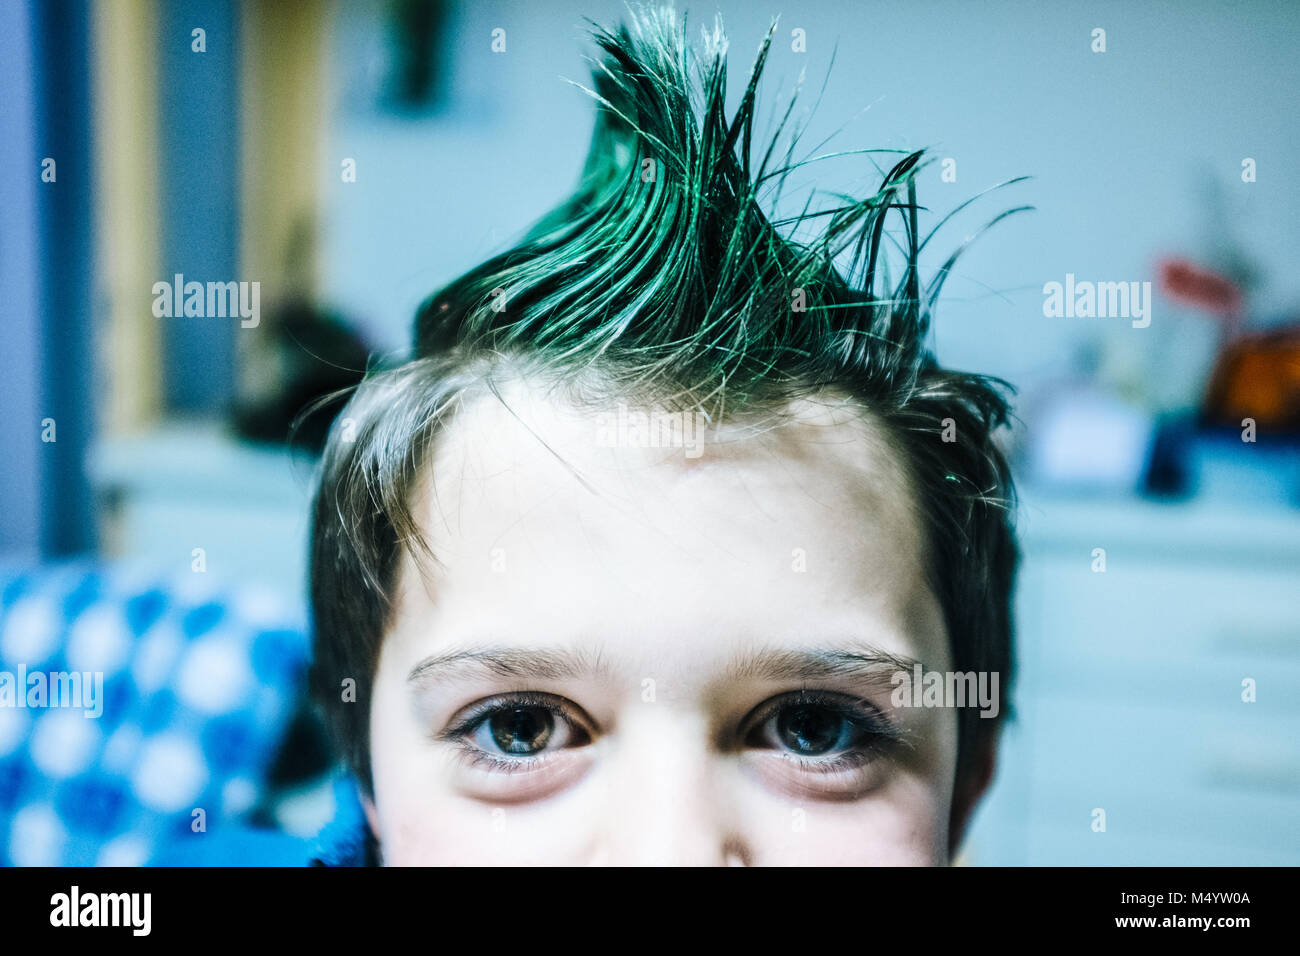 portrait of 9 year old boy at home with crest of green colored hair Stock Photo